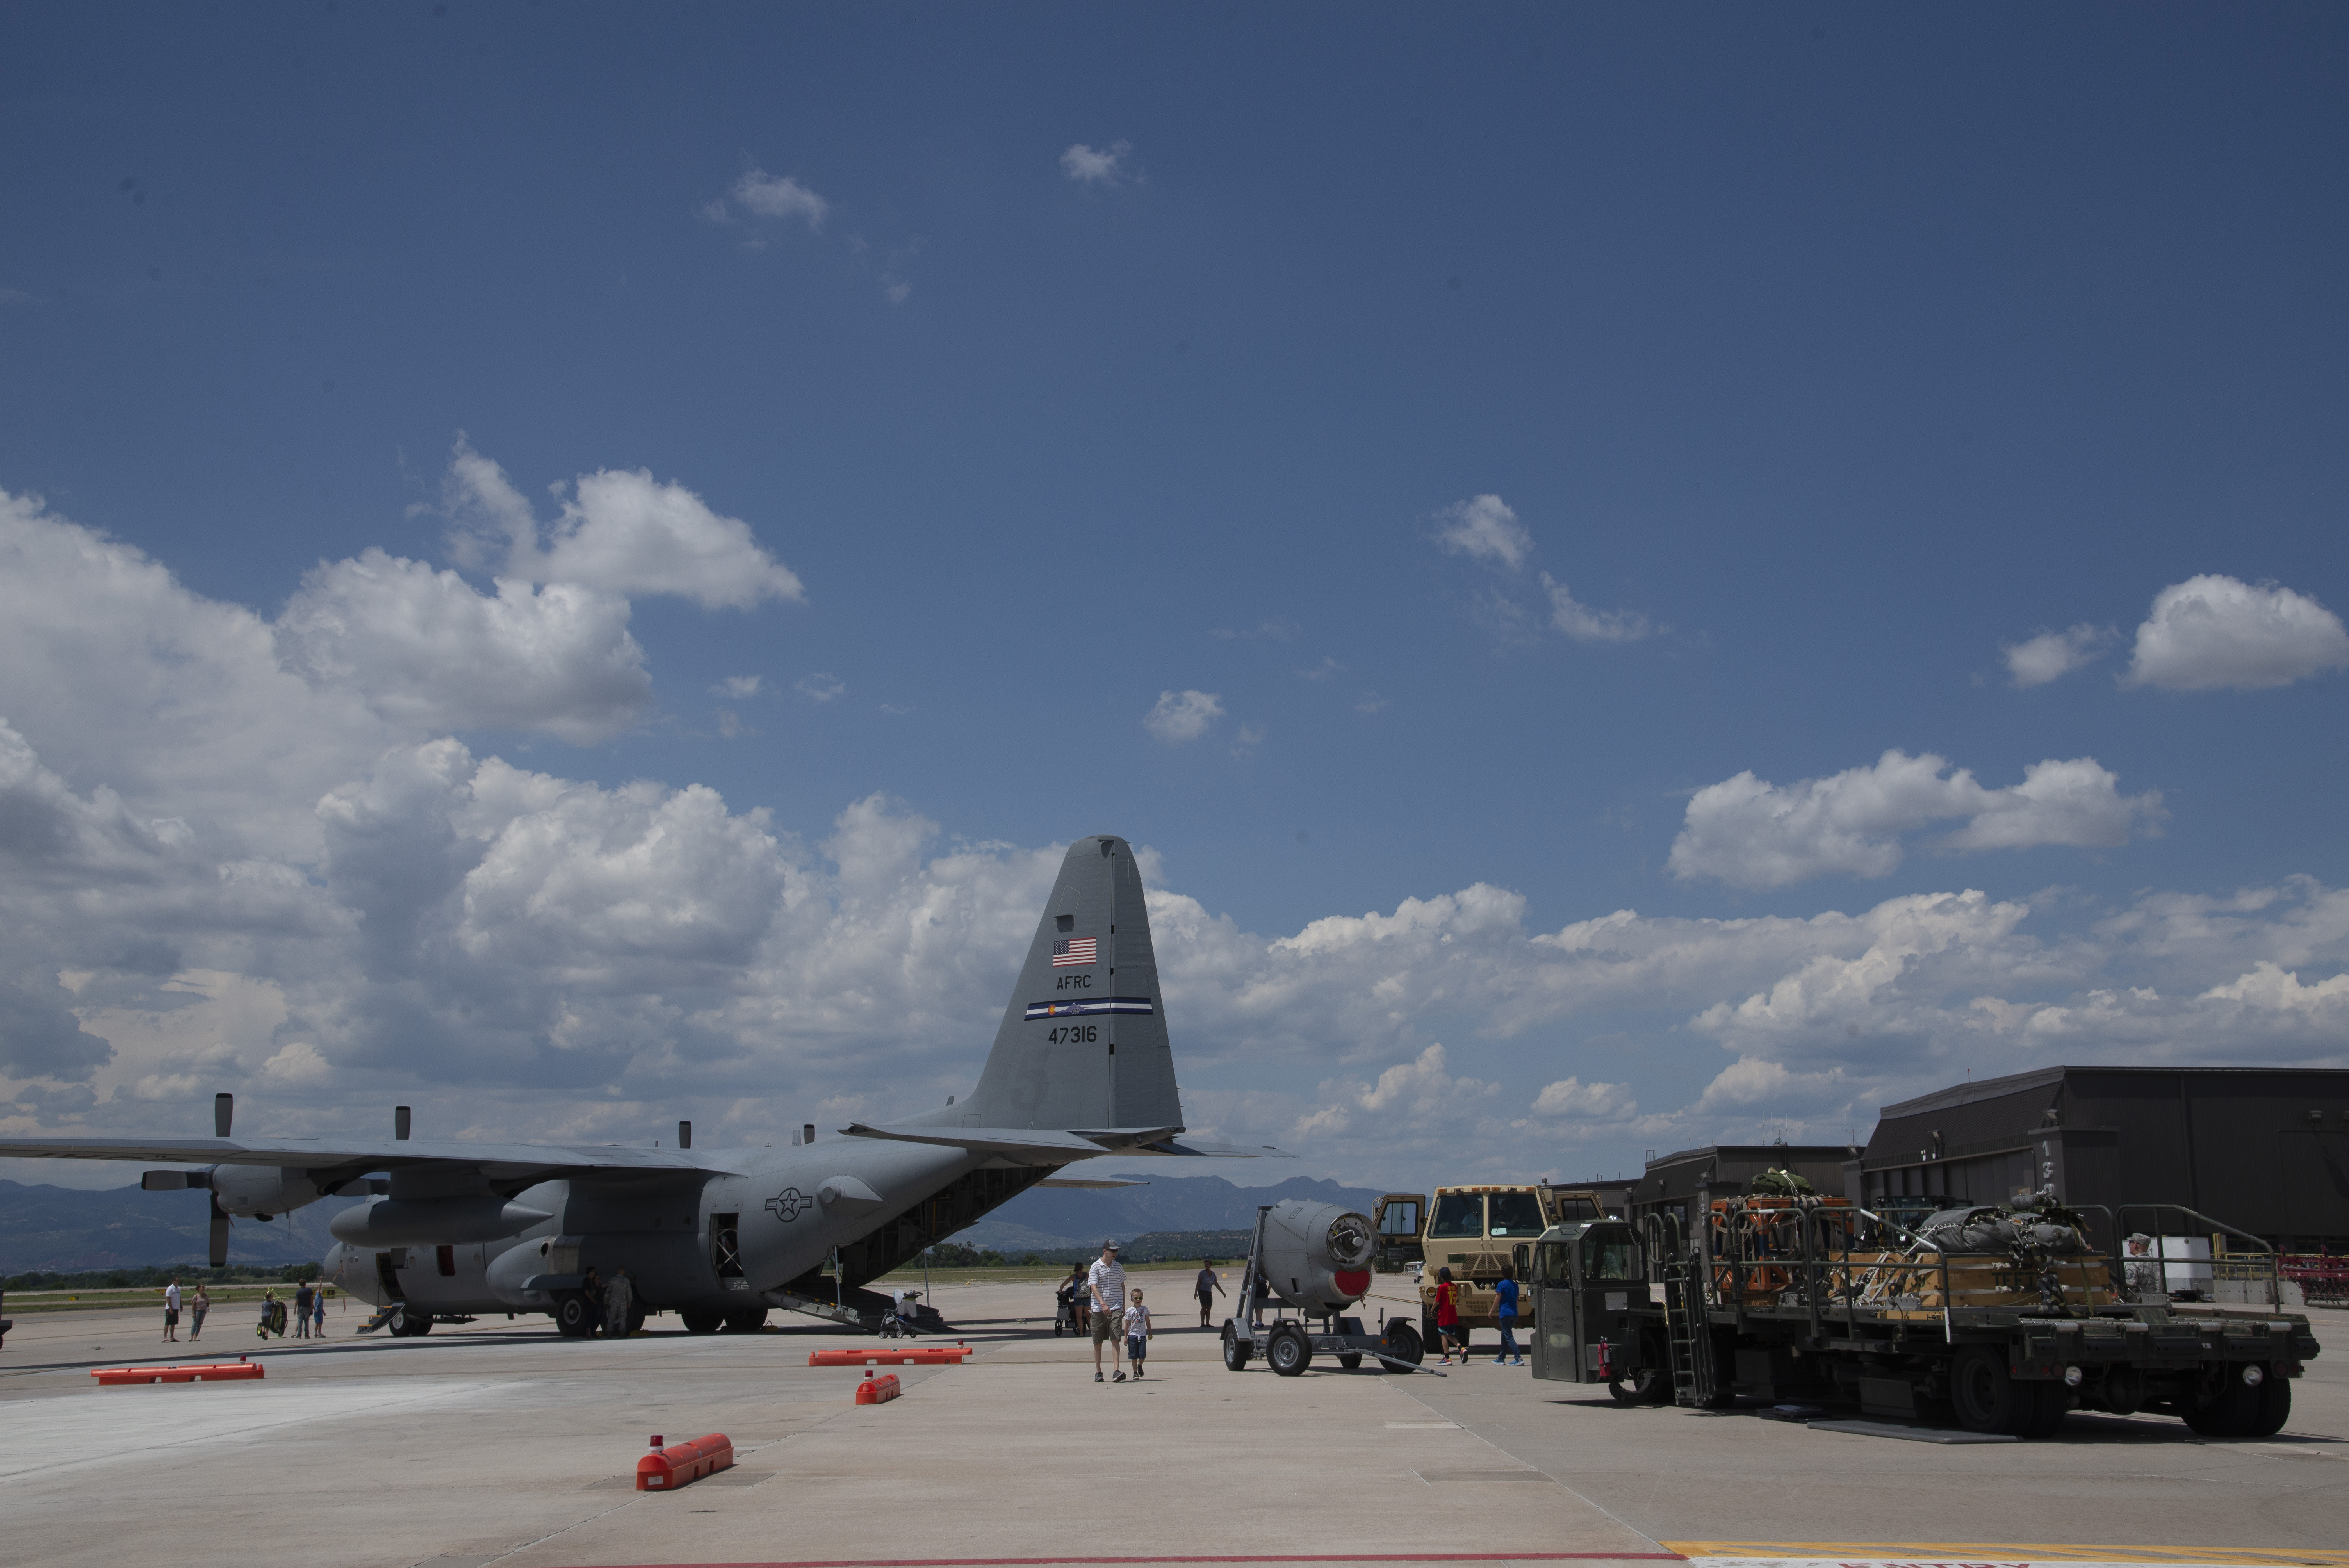 PETERSON AIR FORCE BASE, Colo. – Reserve Citizen Airmen with the 302nd Airlift Wing and their families tour a C-130 Hercules aircraft and equipment during the wing’s annual family day, Aug. 3, 2019, at Peterson Air Force Base, Colorado. Multiple units including the 39th Aerial Port Squadron, 302nd Maintenance Squadron, 731st Airlift Squadron and the 34th Aeromedical Evacuation Squadron provided equipment and subject matter experts for families to see and talk to during the event. (U.S. Air Force photo by Staff Sgt. Tiffany Lundberg)